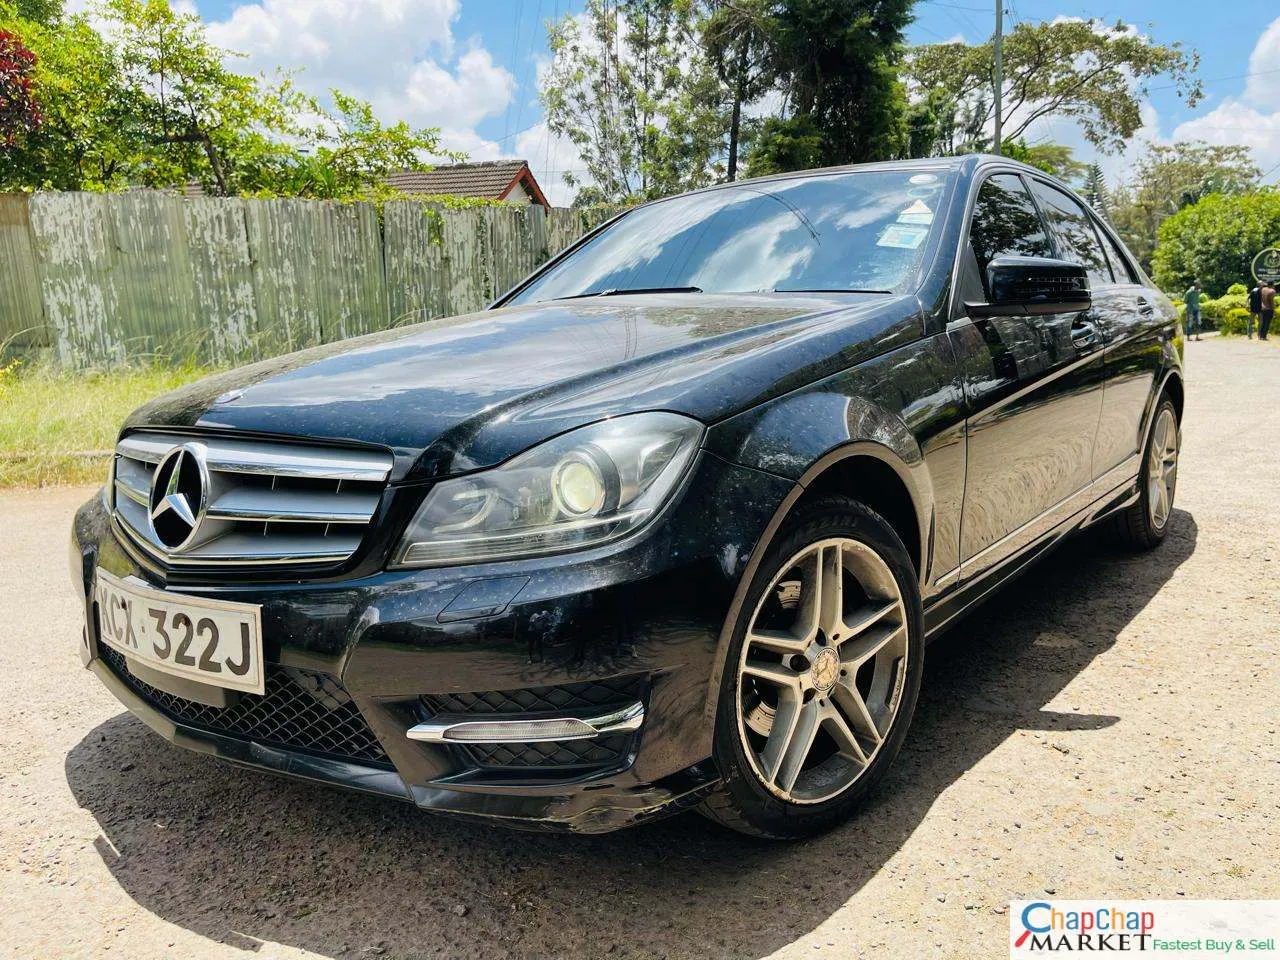 Mercedes Benz C200 🔥 🔥 You Pay 30% DEPOSIT Trade in OK EXCLUSIVE Hire purchase installments